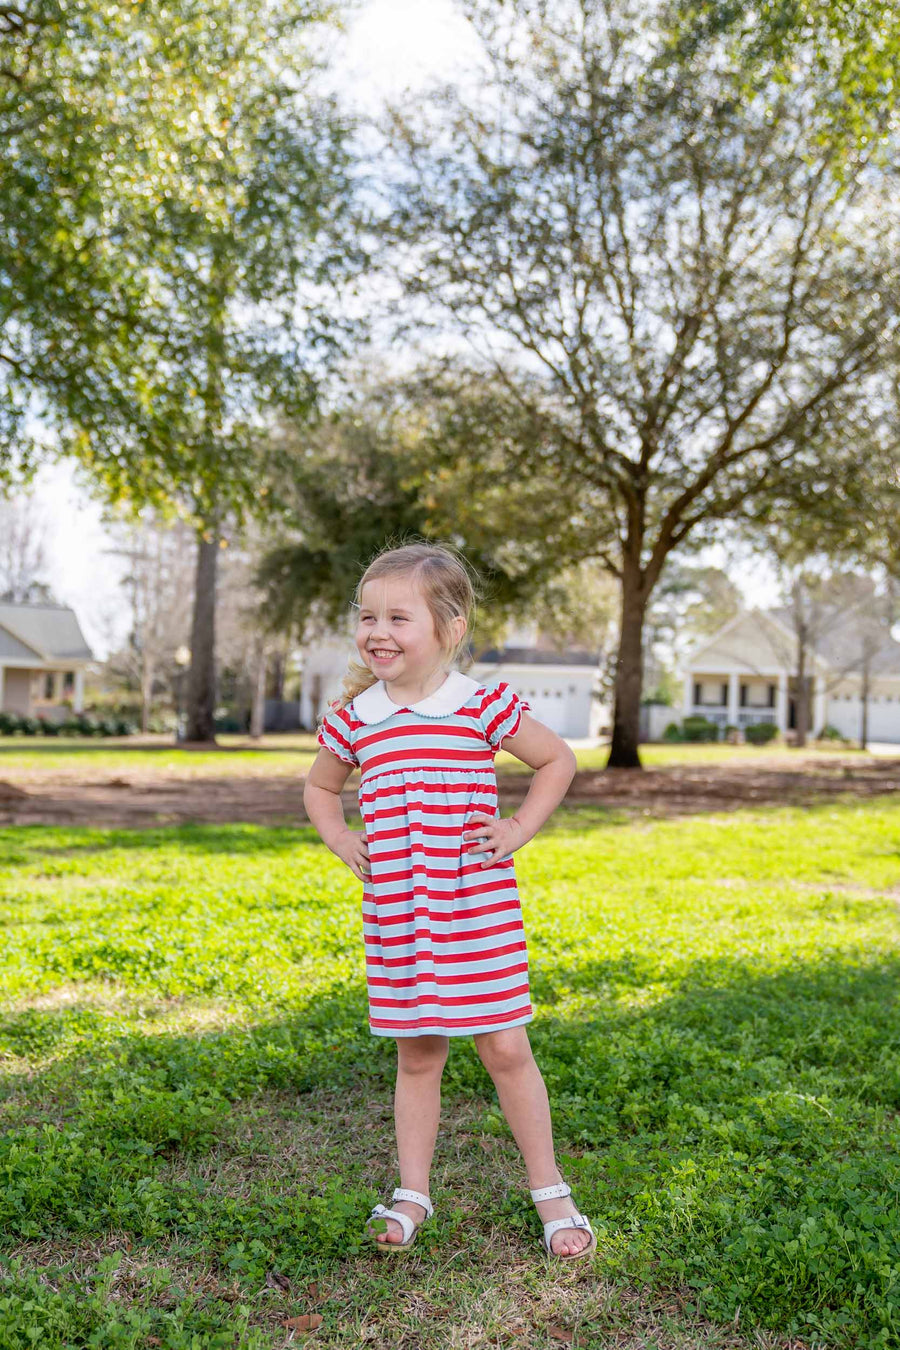 Blue & Red Striped Play Dress